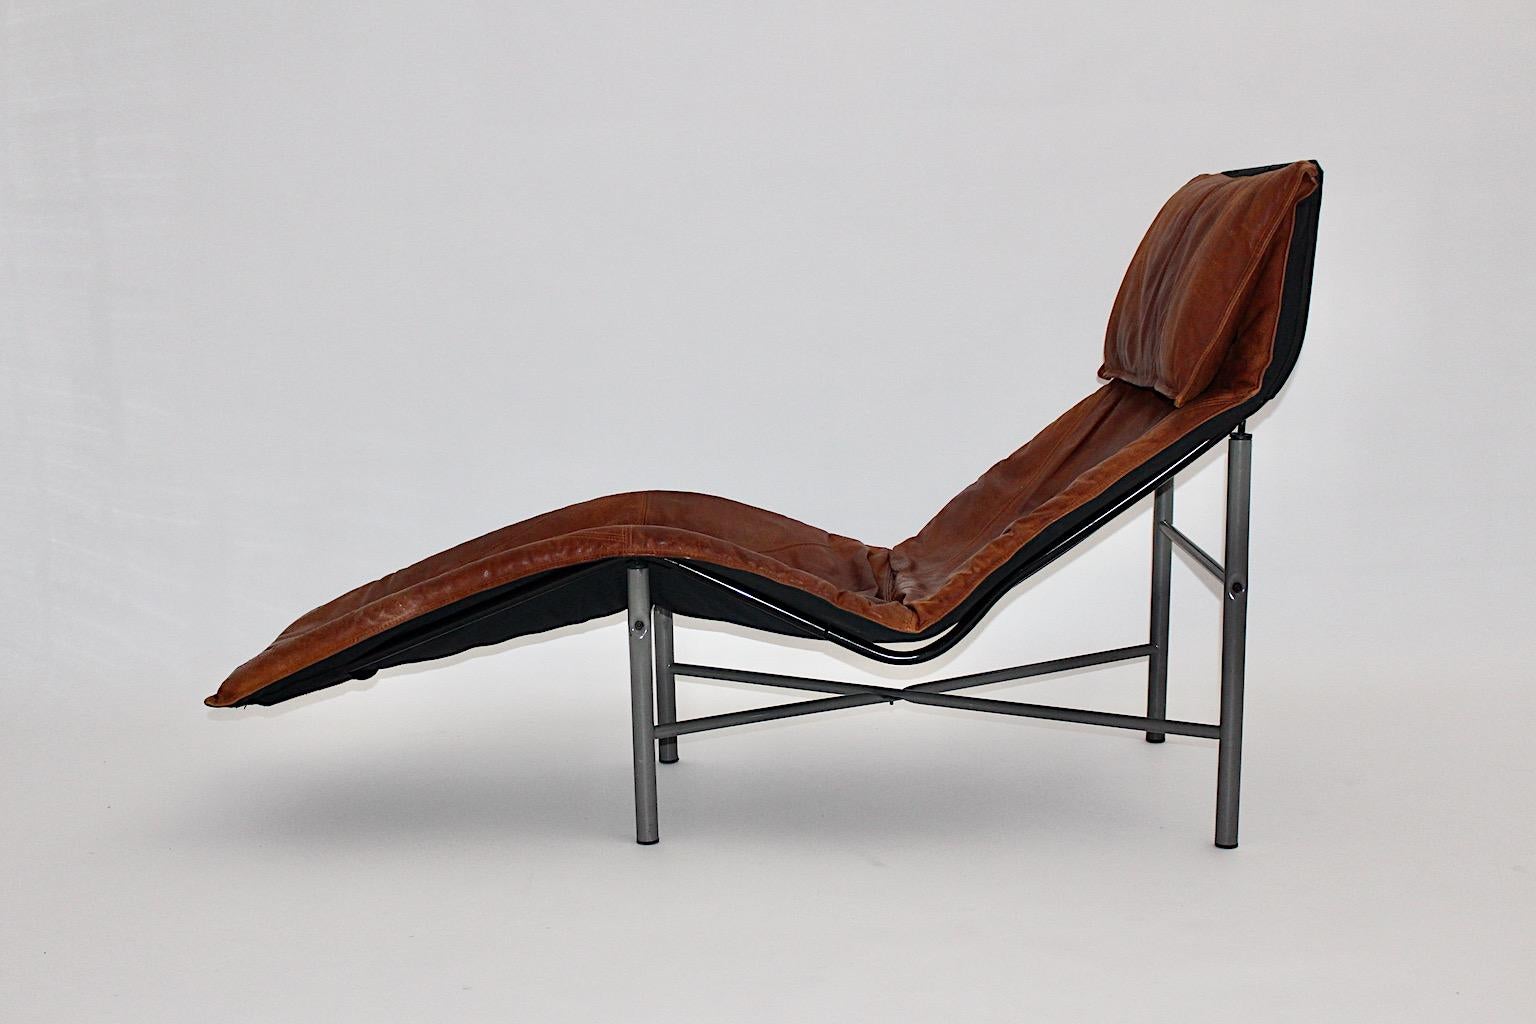 20th Century Chaise Lounge Daybed Vintage Tord Bjorklund Brown Leather Metal 1970s Sweden For Sale